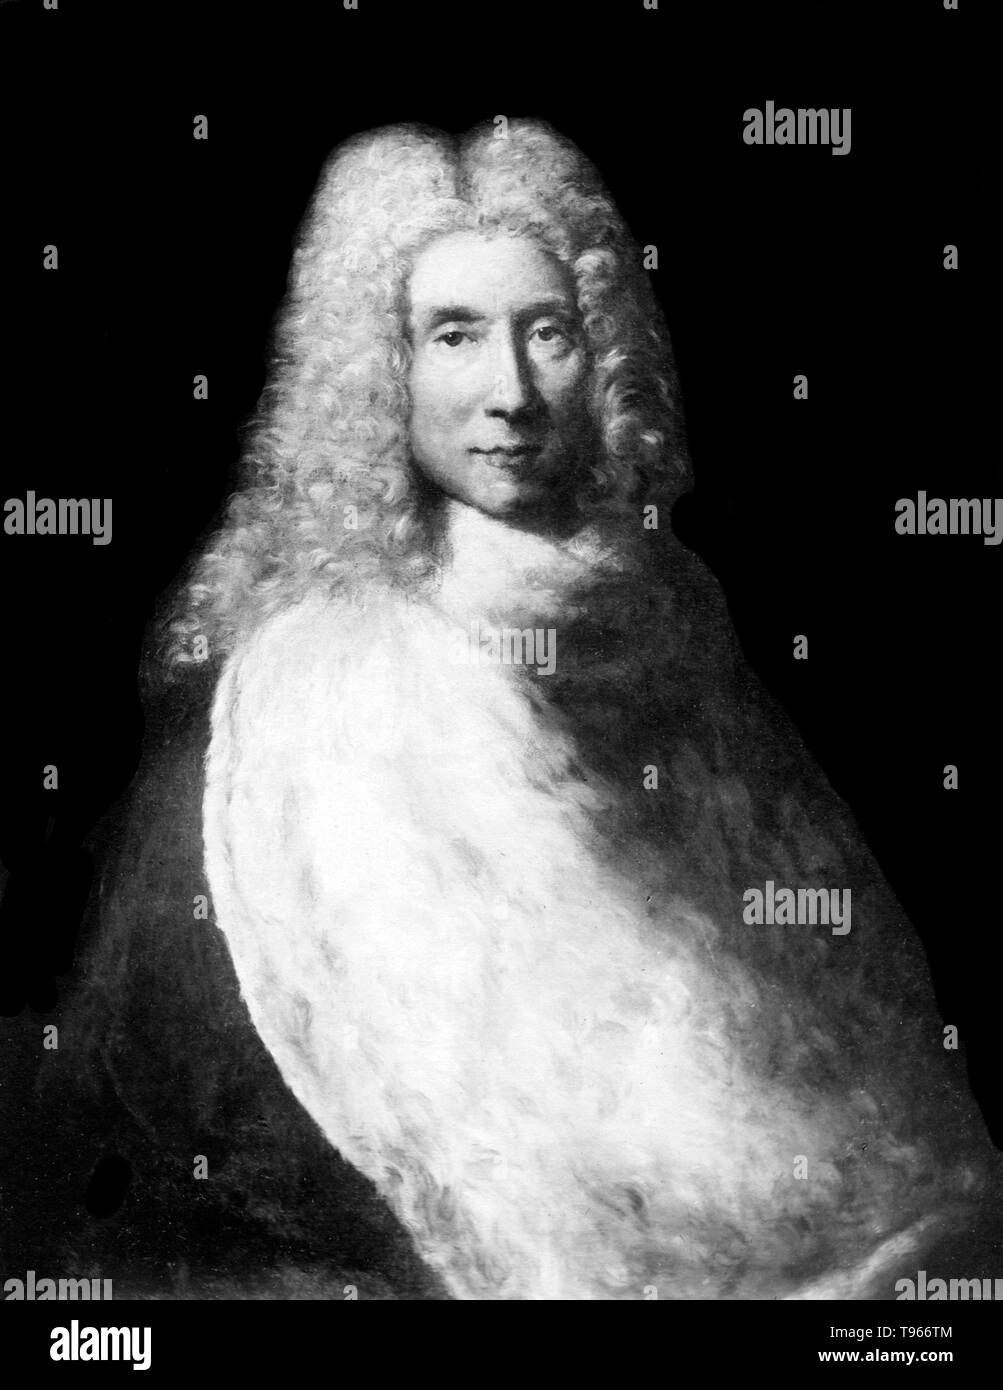 The subject of this portrait, by Jean Francois de Troy, was originally recorded as anonymous, but later said to be Andry; according to modern research, its subject cannot be reliably established, and there is no certain portrait of Andry. Nicolas Andry de Bois-Regard (1658 - May 13, 1742) was a French physician and writer. His first book, was published in 1700, and translated into English in 1701 as An Account of the Breeding of Worms in Human Bodies. Stock Photo